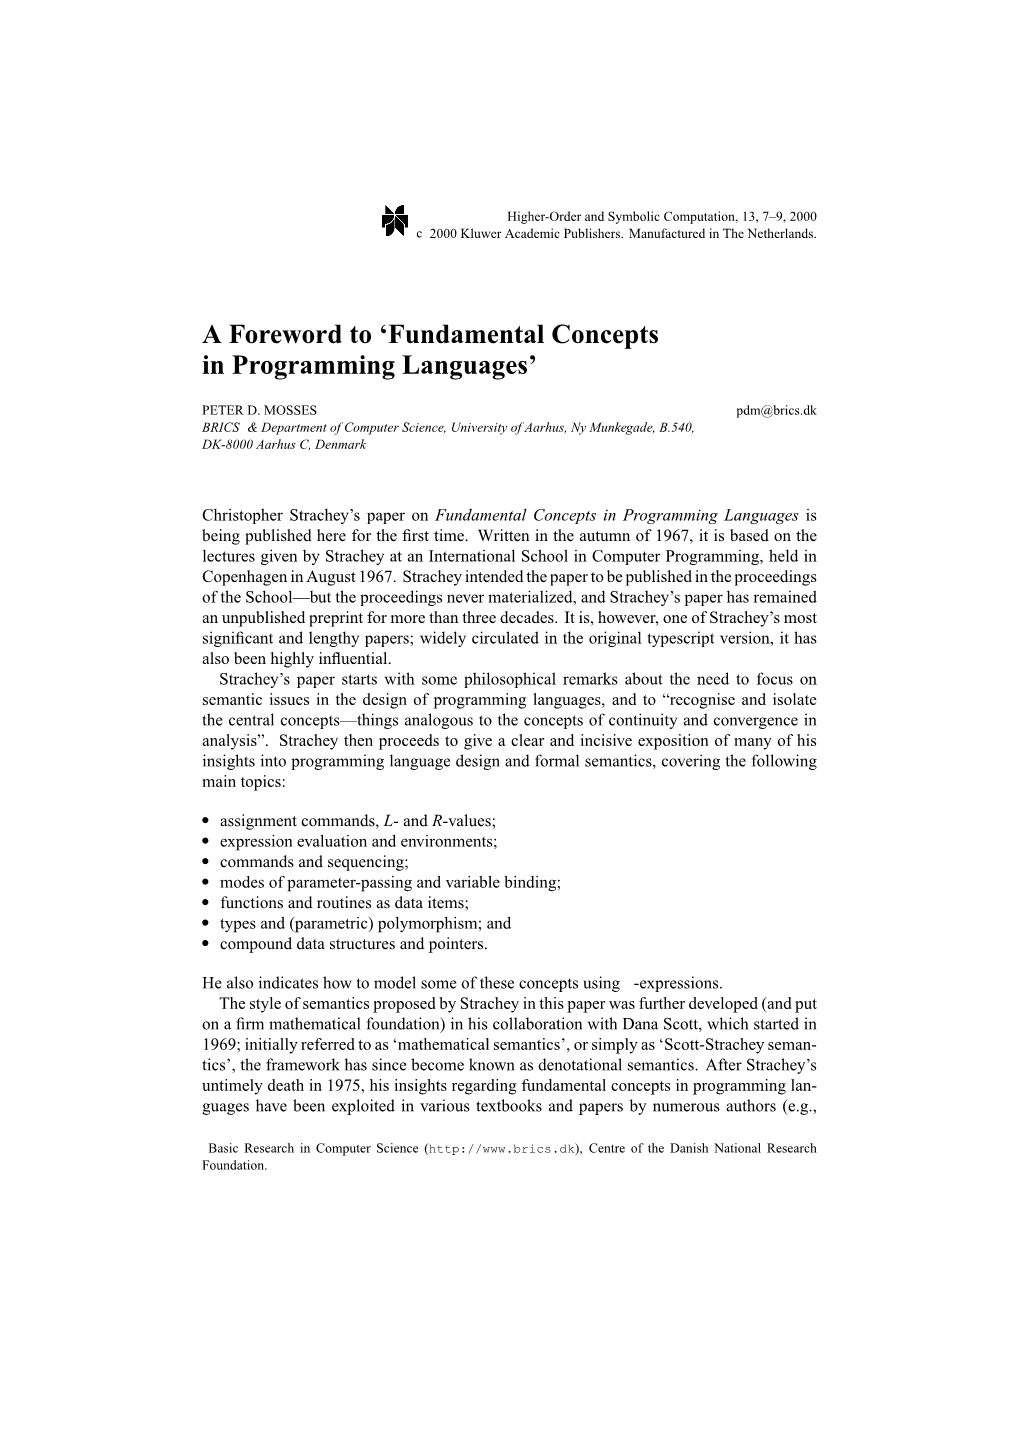 A Foreword to 'Fundamental Concepts in Programming Languages'